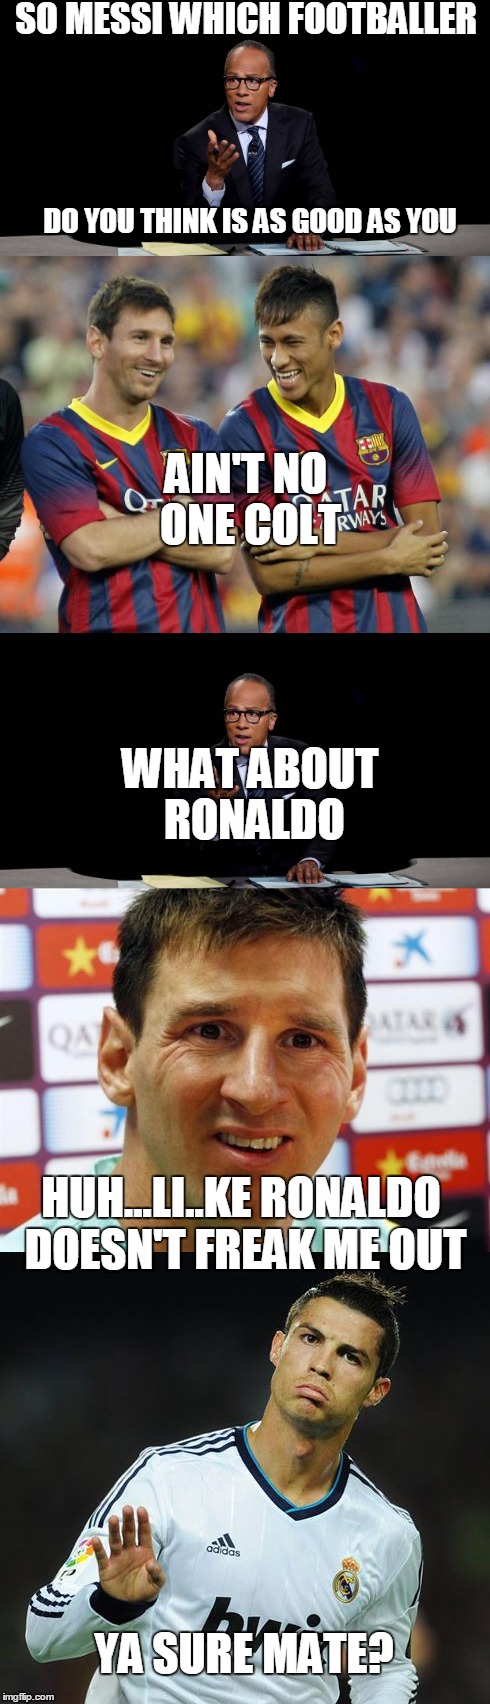 messi fears | SO MESSI WHICH FOOTBALLER; DO YOU THINK IS AS GOOD AS YOU; AIN'T NO ONE COLT; WHAT ABOUT RONALDO; HUH...LI..KE RONALDO DOESN'T FREAK ME OUT; YA SURE MATE? | image tagged in messi vs ronaldo,memes,football,lester holt | made w/ Imgflip meme maker